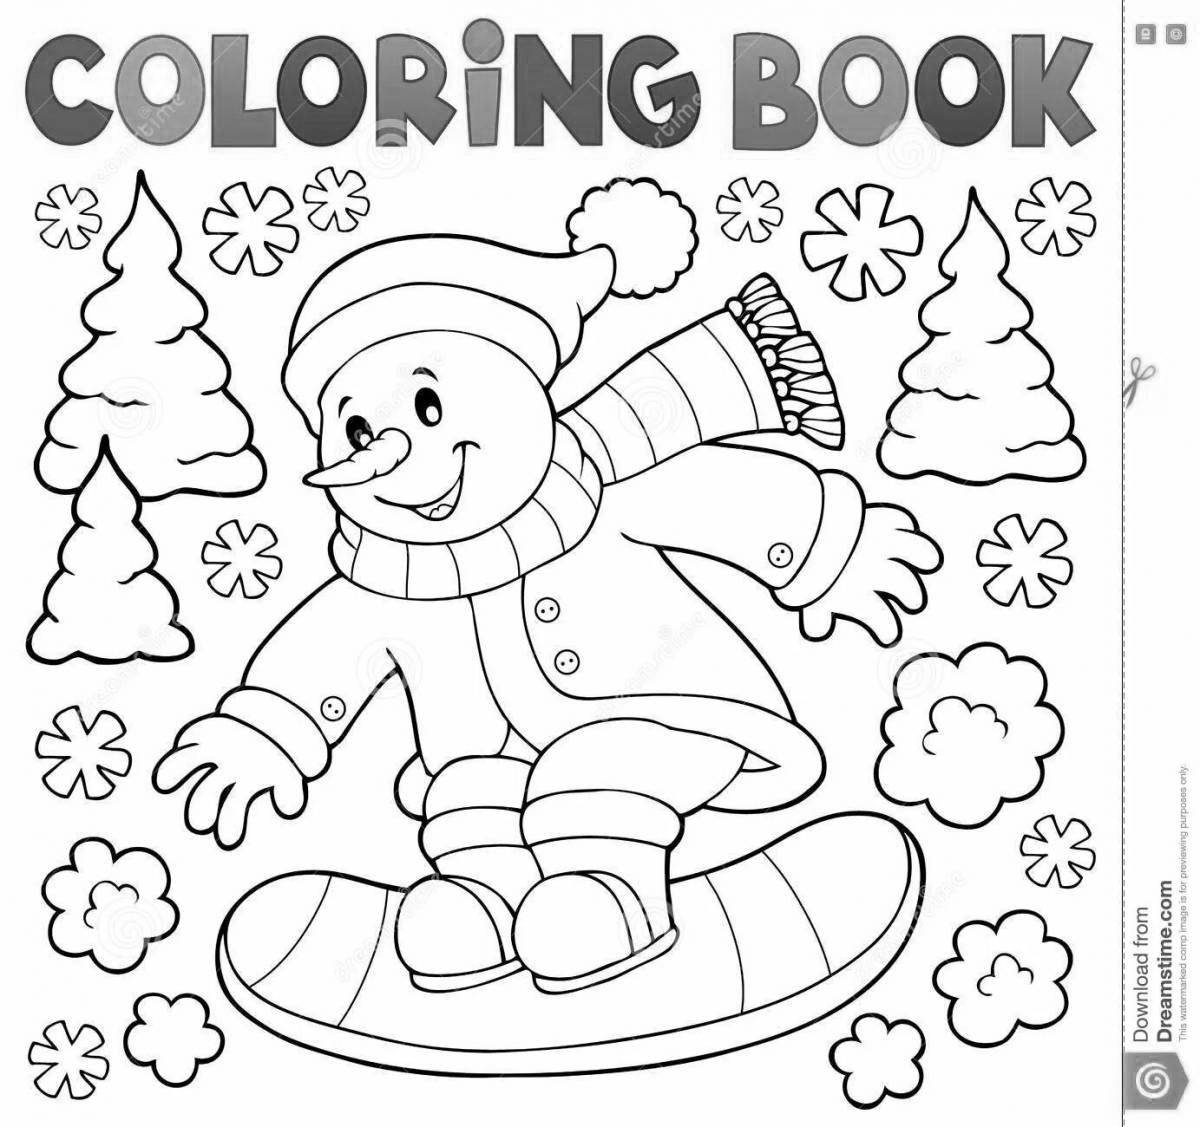 Colorful coloring of a snowman on skates